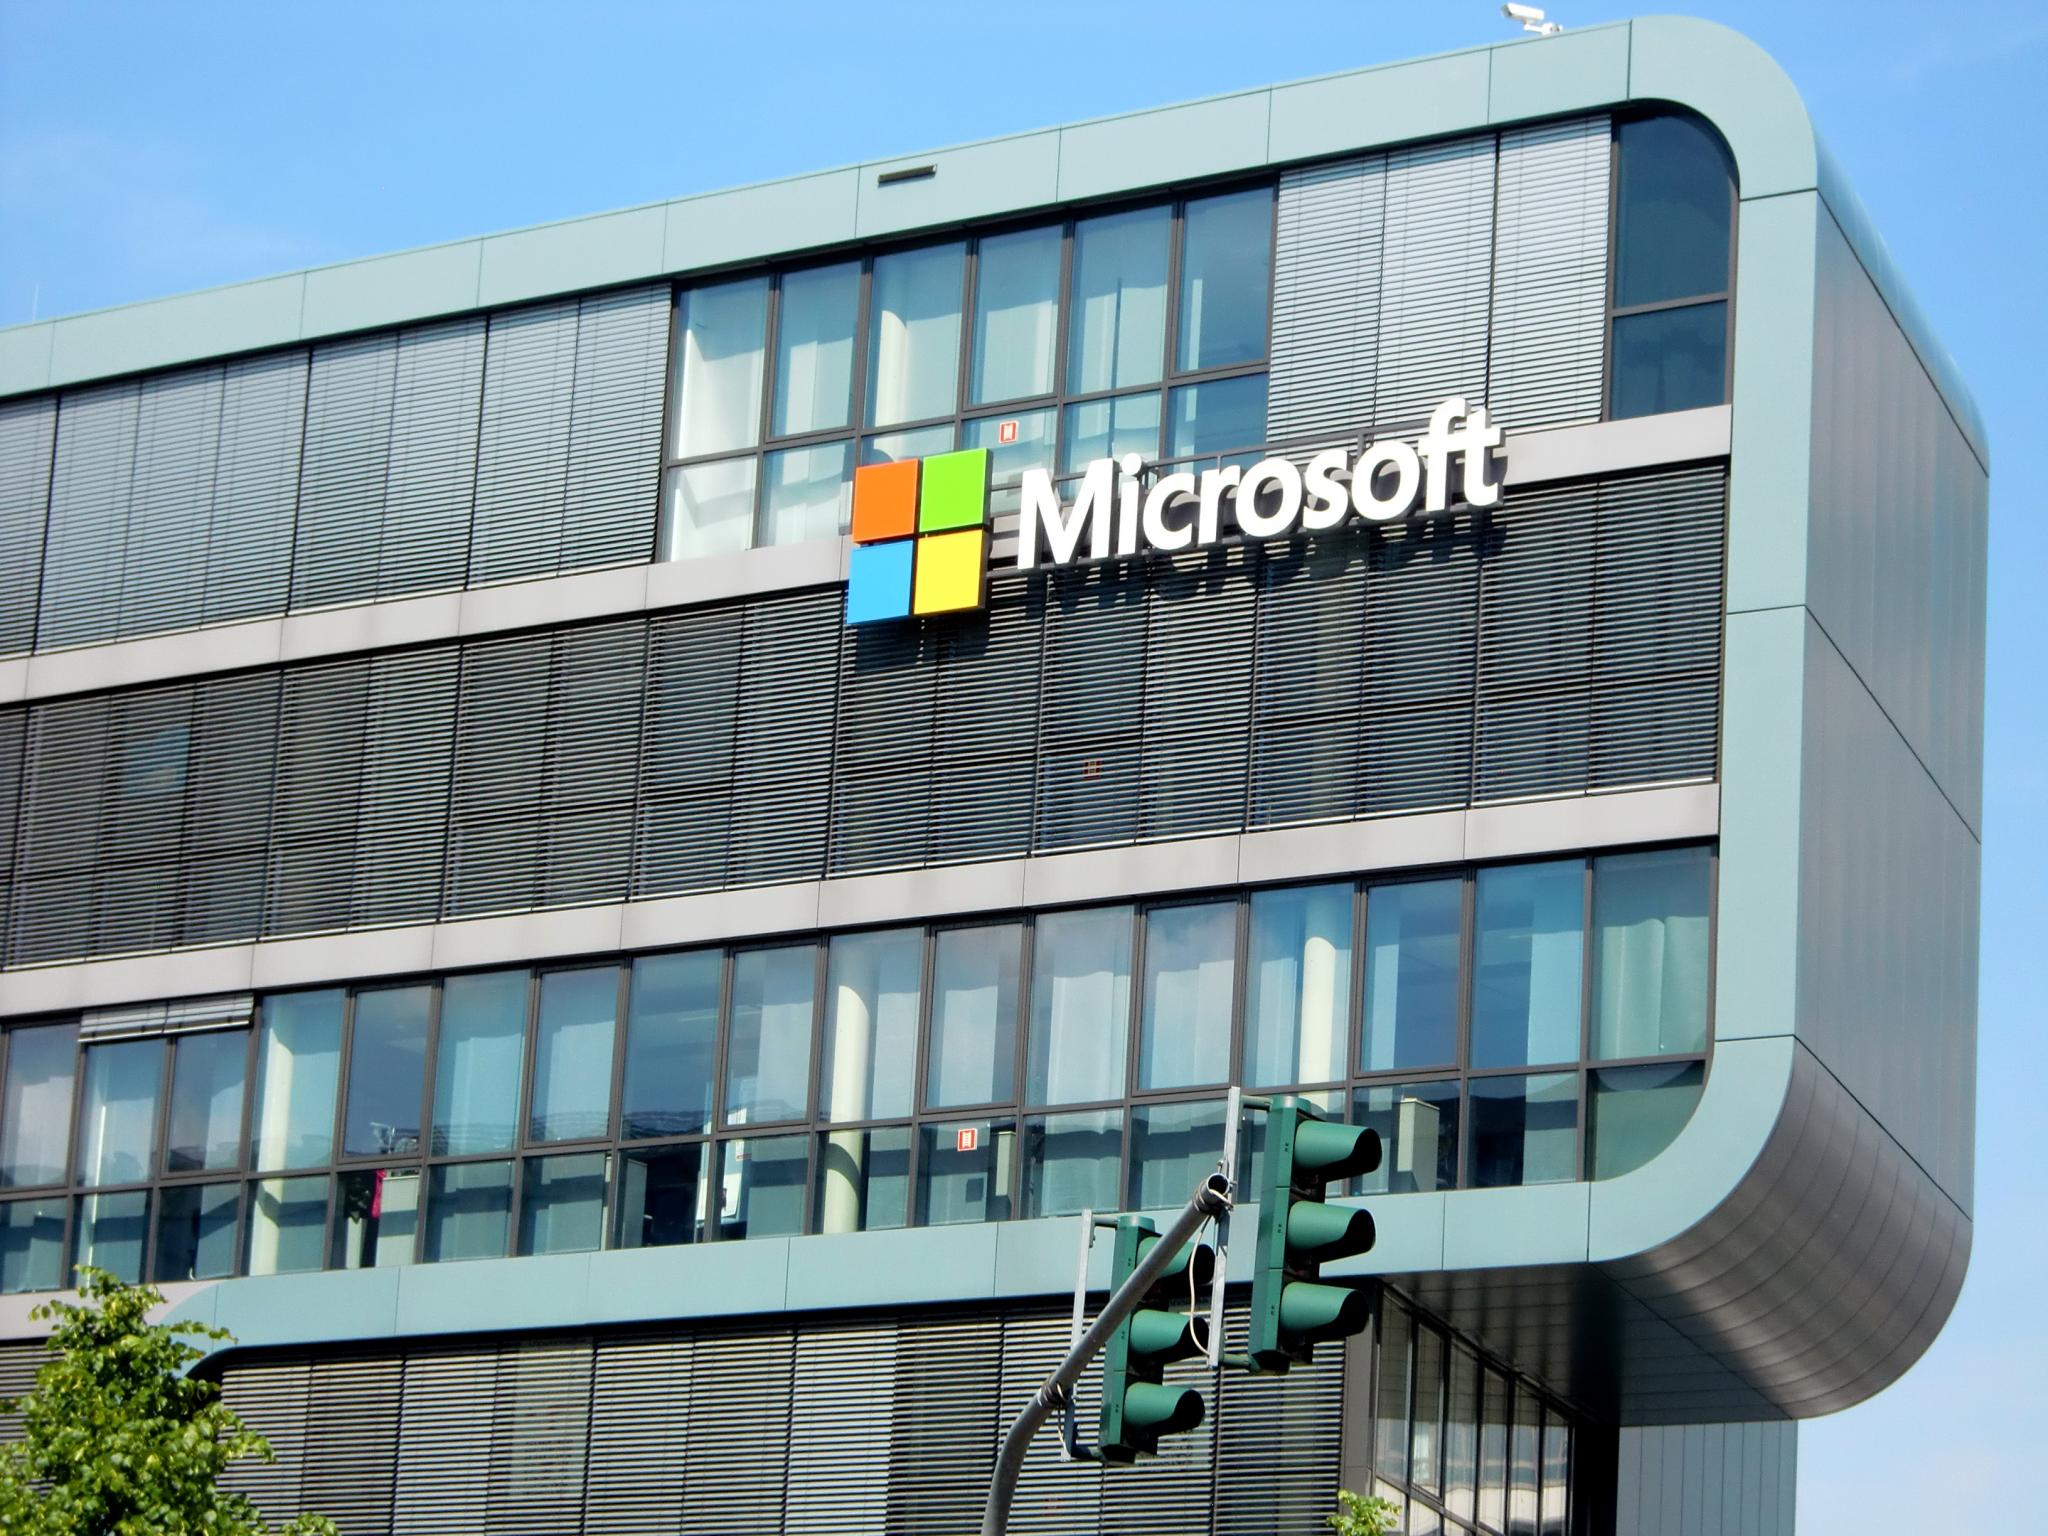  microsoft-agrees-to-buy-cybersecurity-firm-riskiq-for-500m-report 